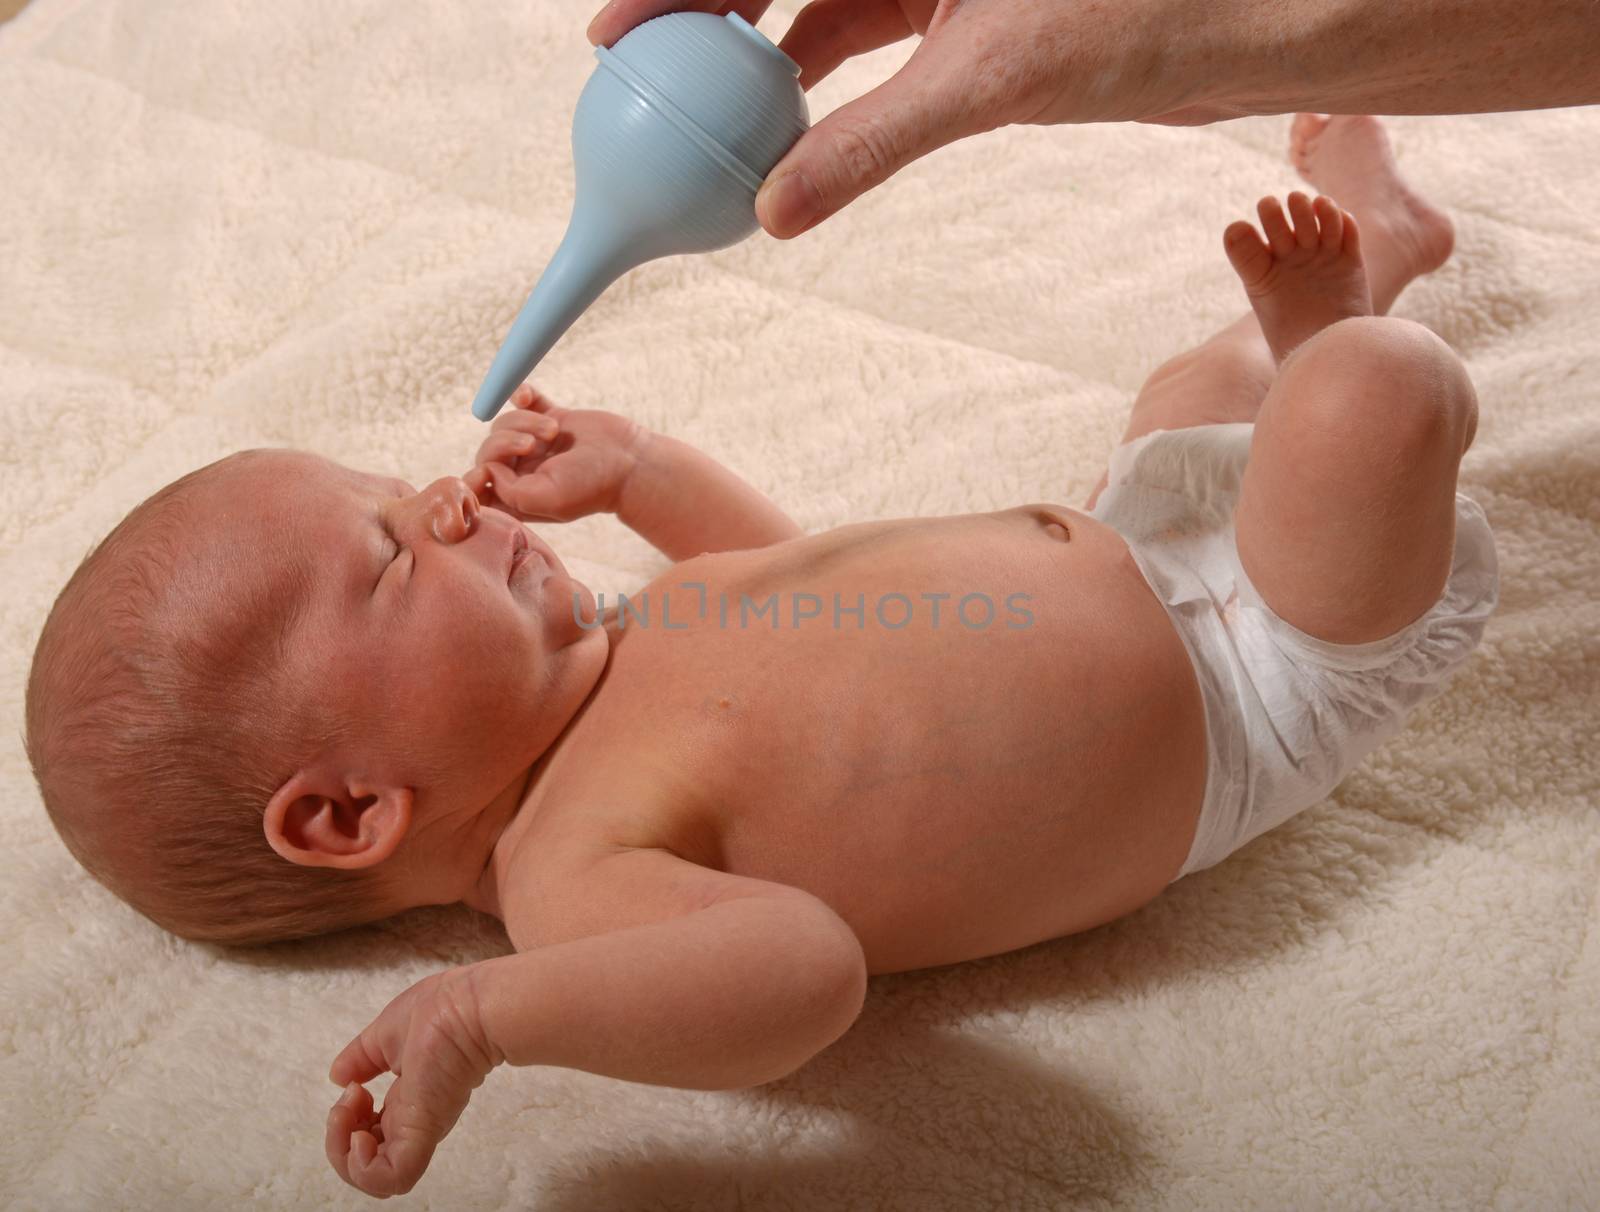 infant and nasal aspirator by ftlaudgirl